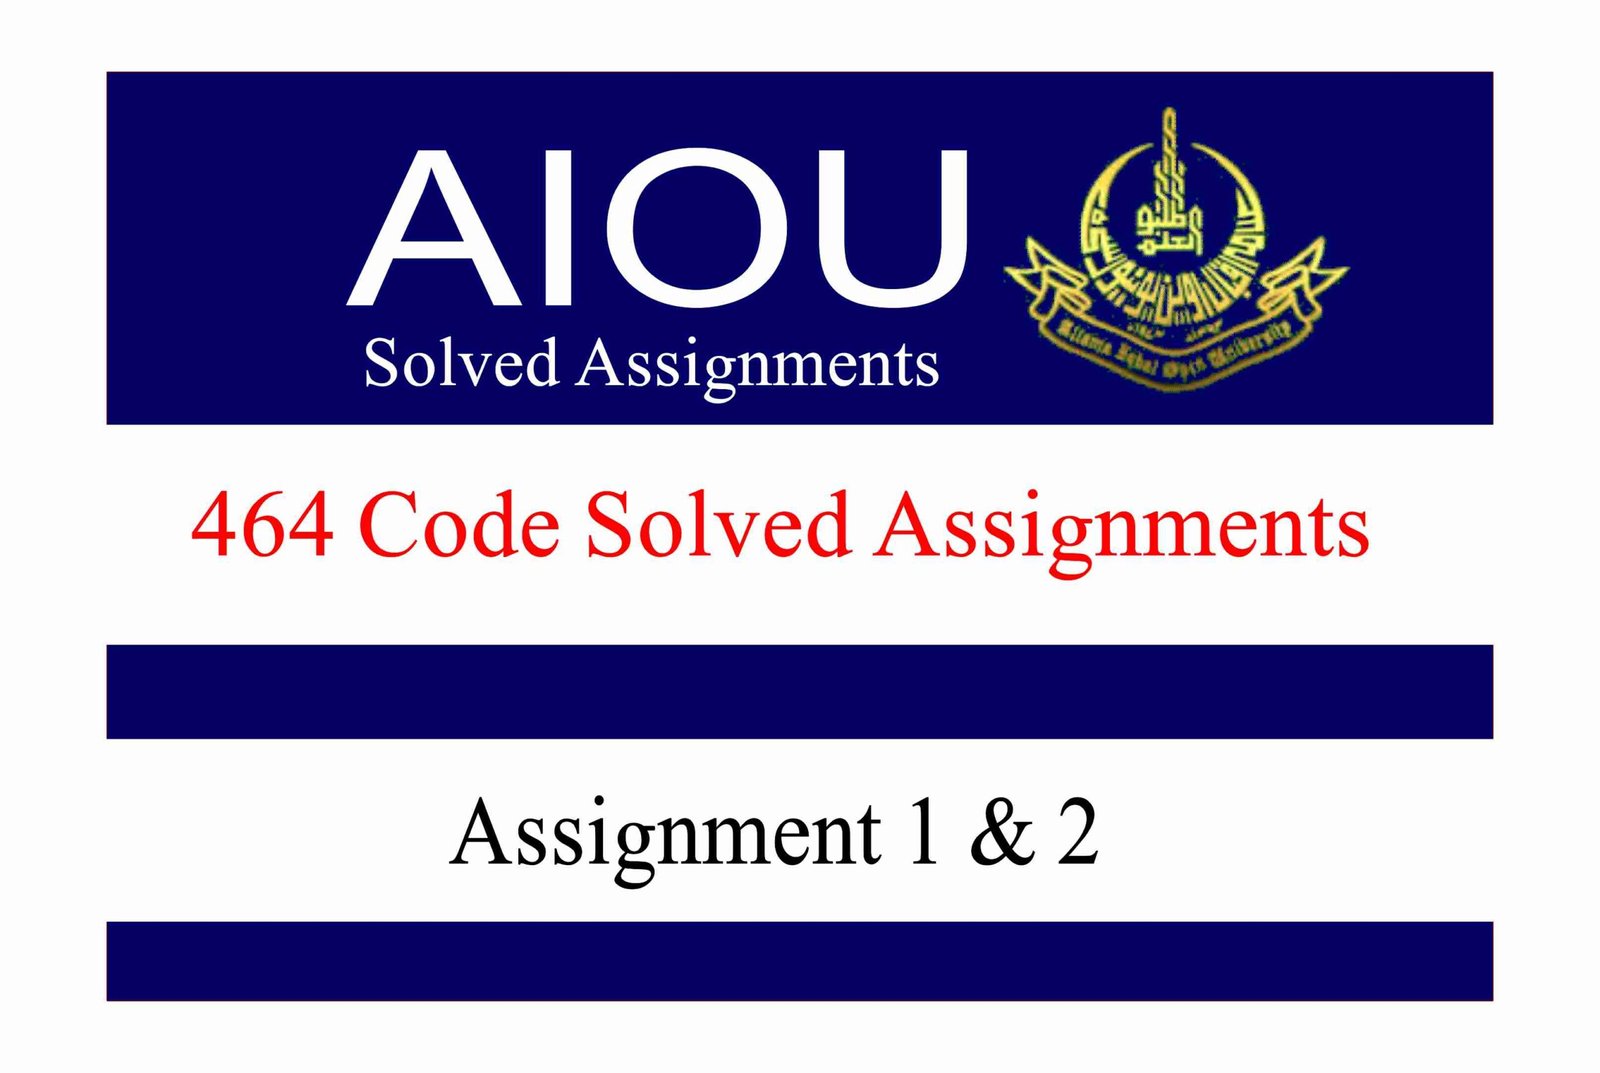 AIOU Course Code 464 Solved Assignments